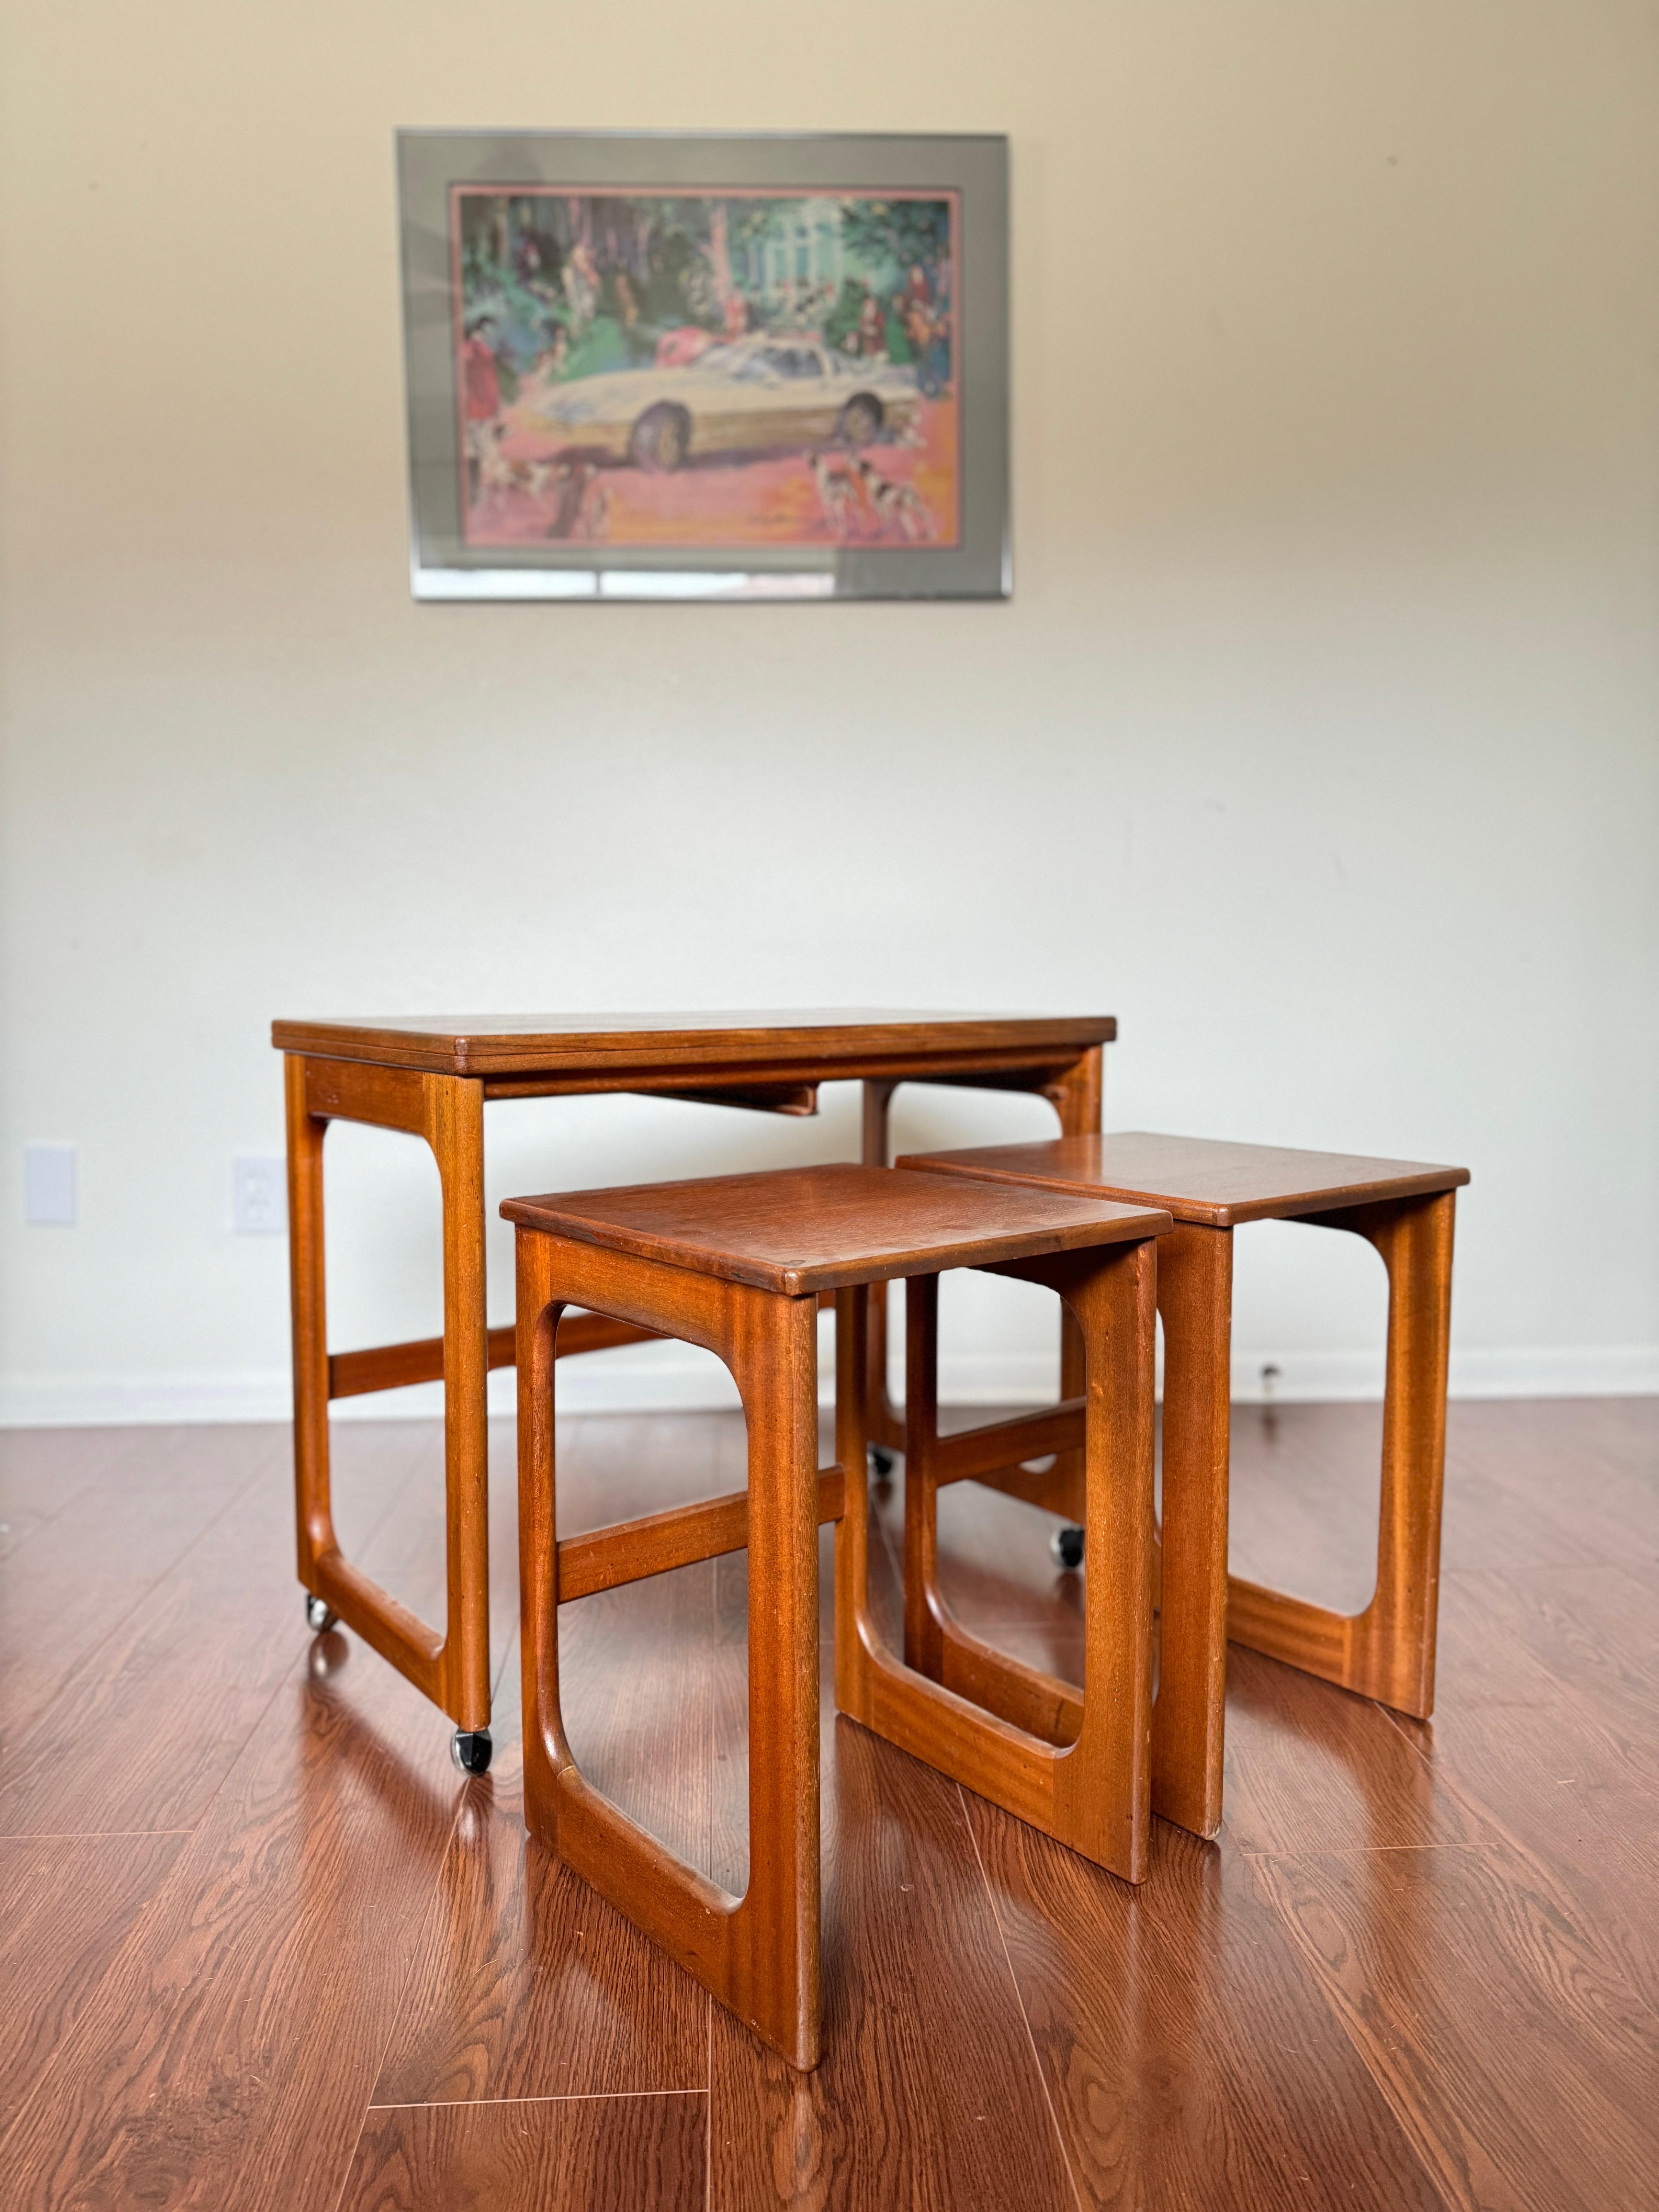 Multifunctional mid century extendable teak table by McIntosh, circa 1960s For Sale 3